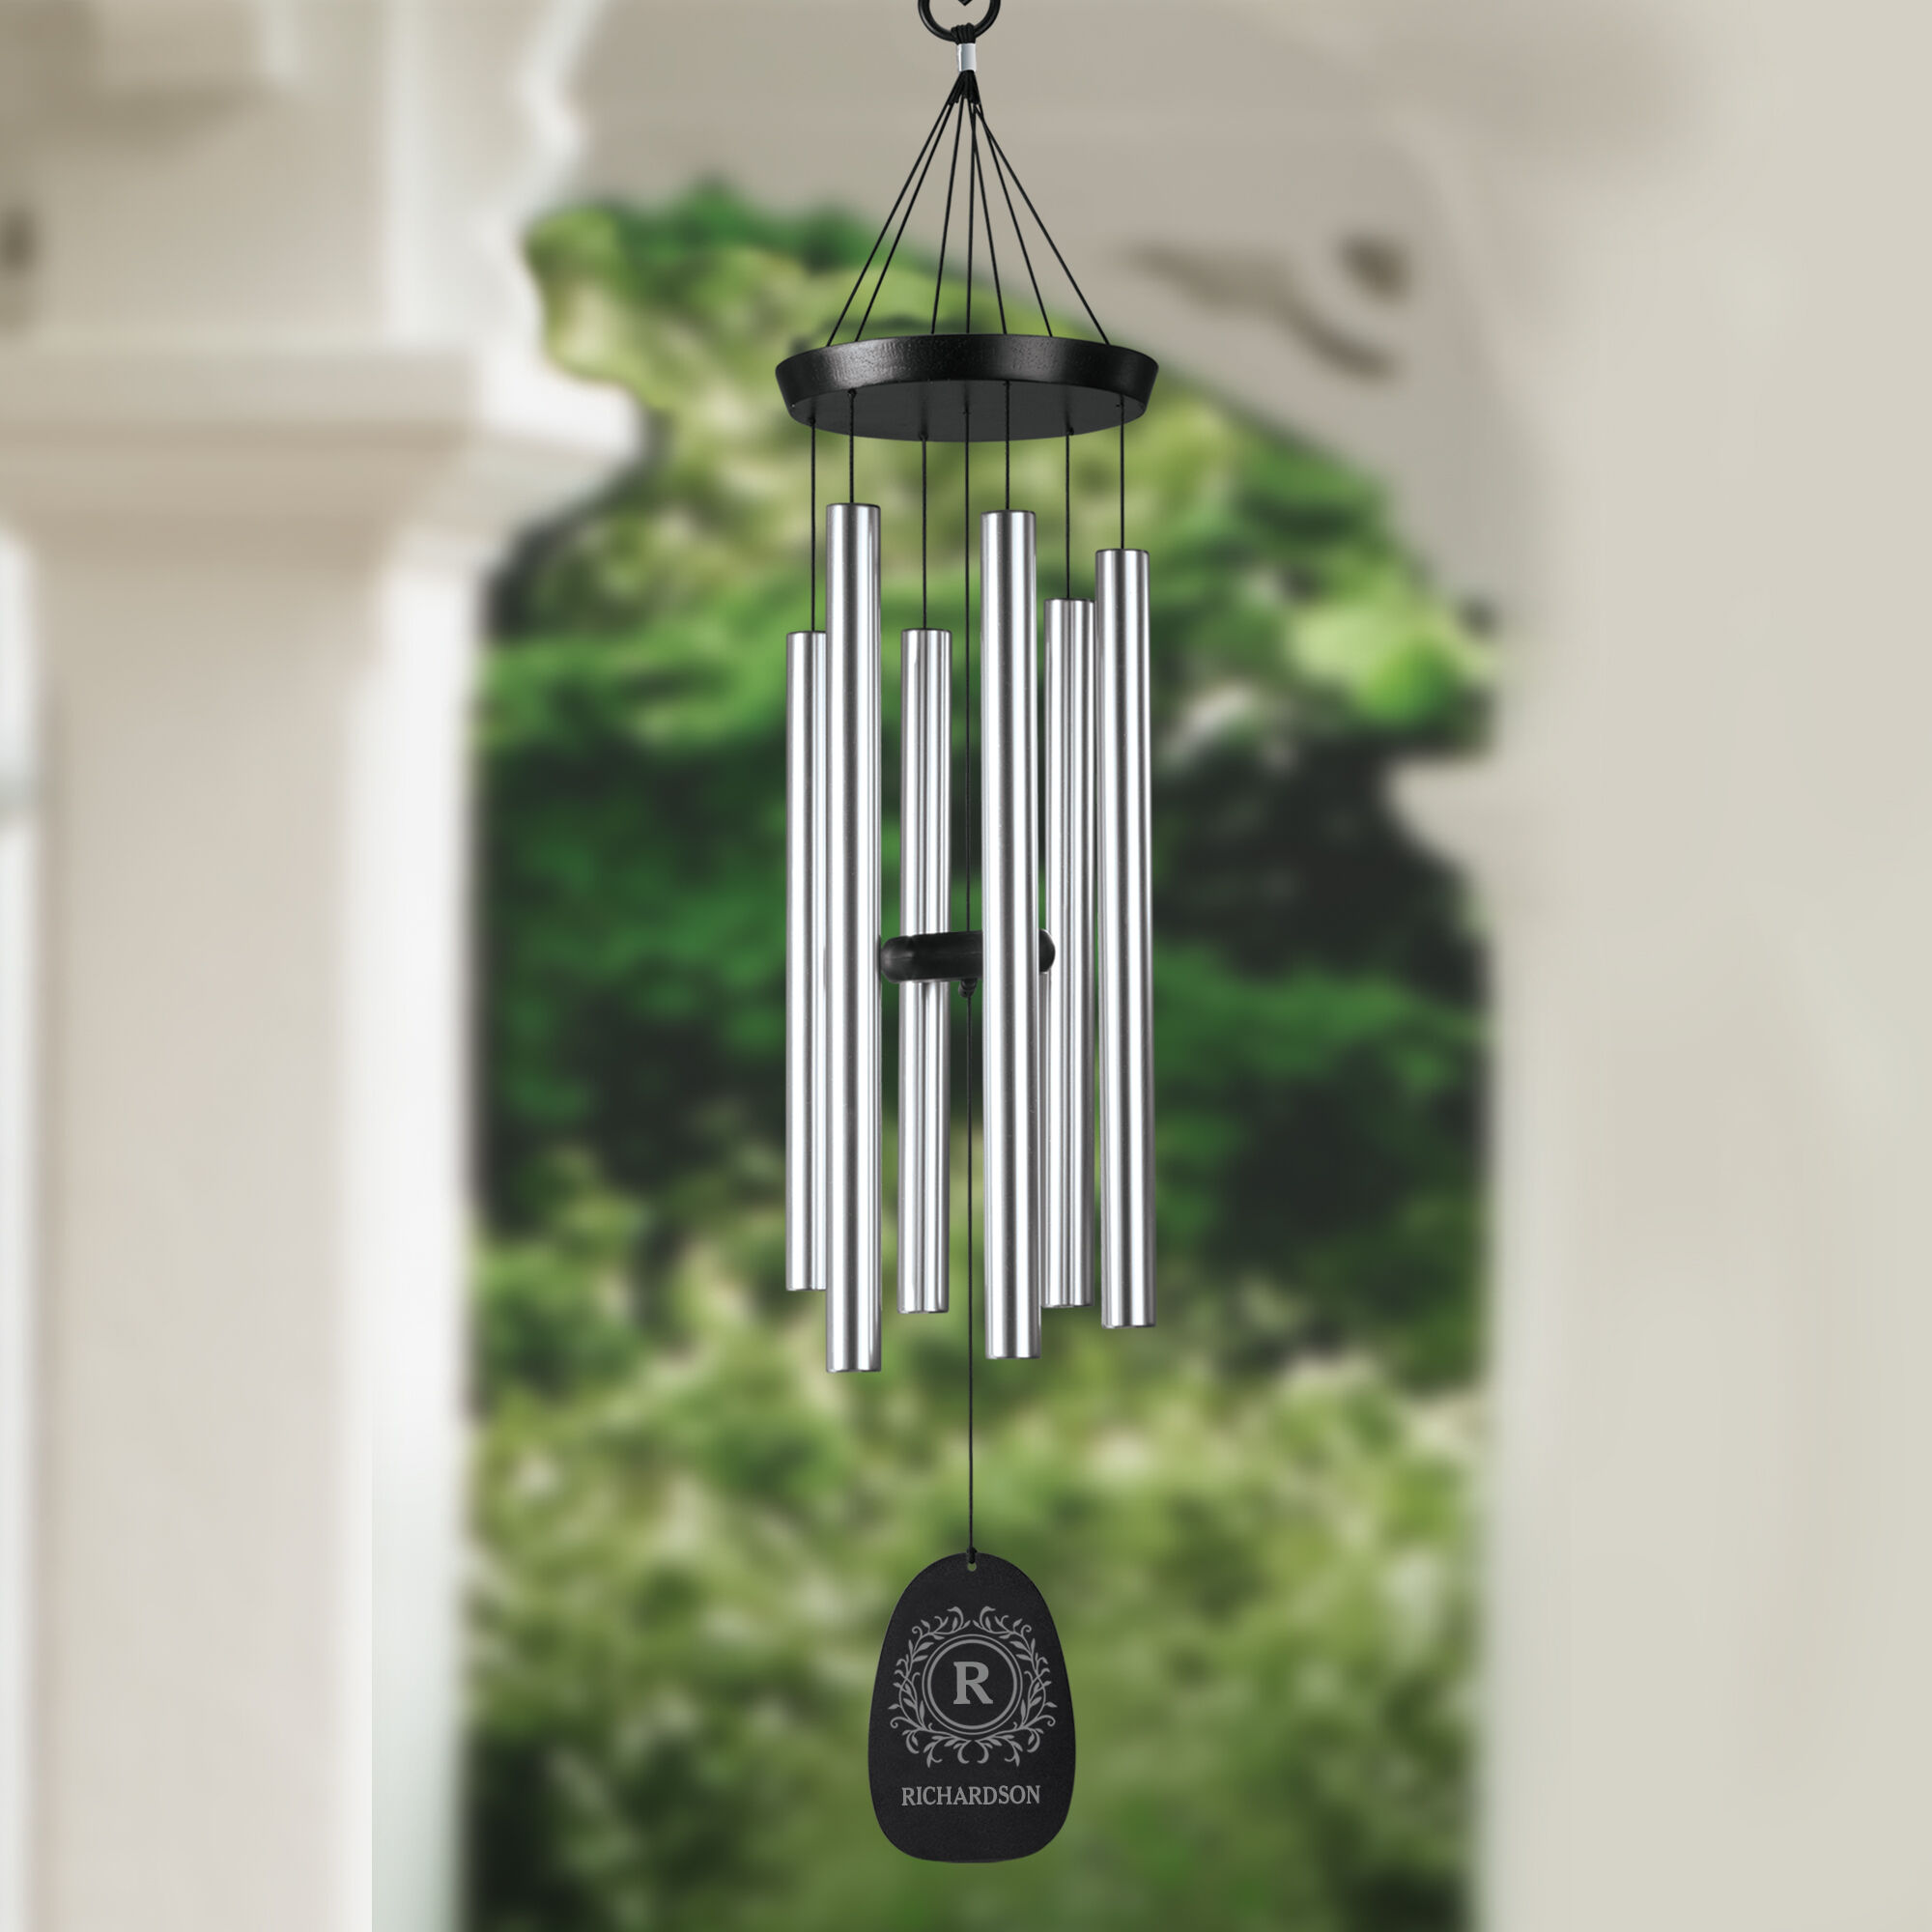 The Personalized Wind Chime 10245 0046 c room